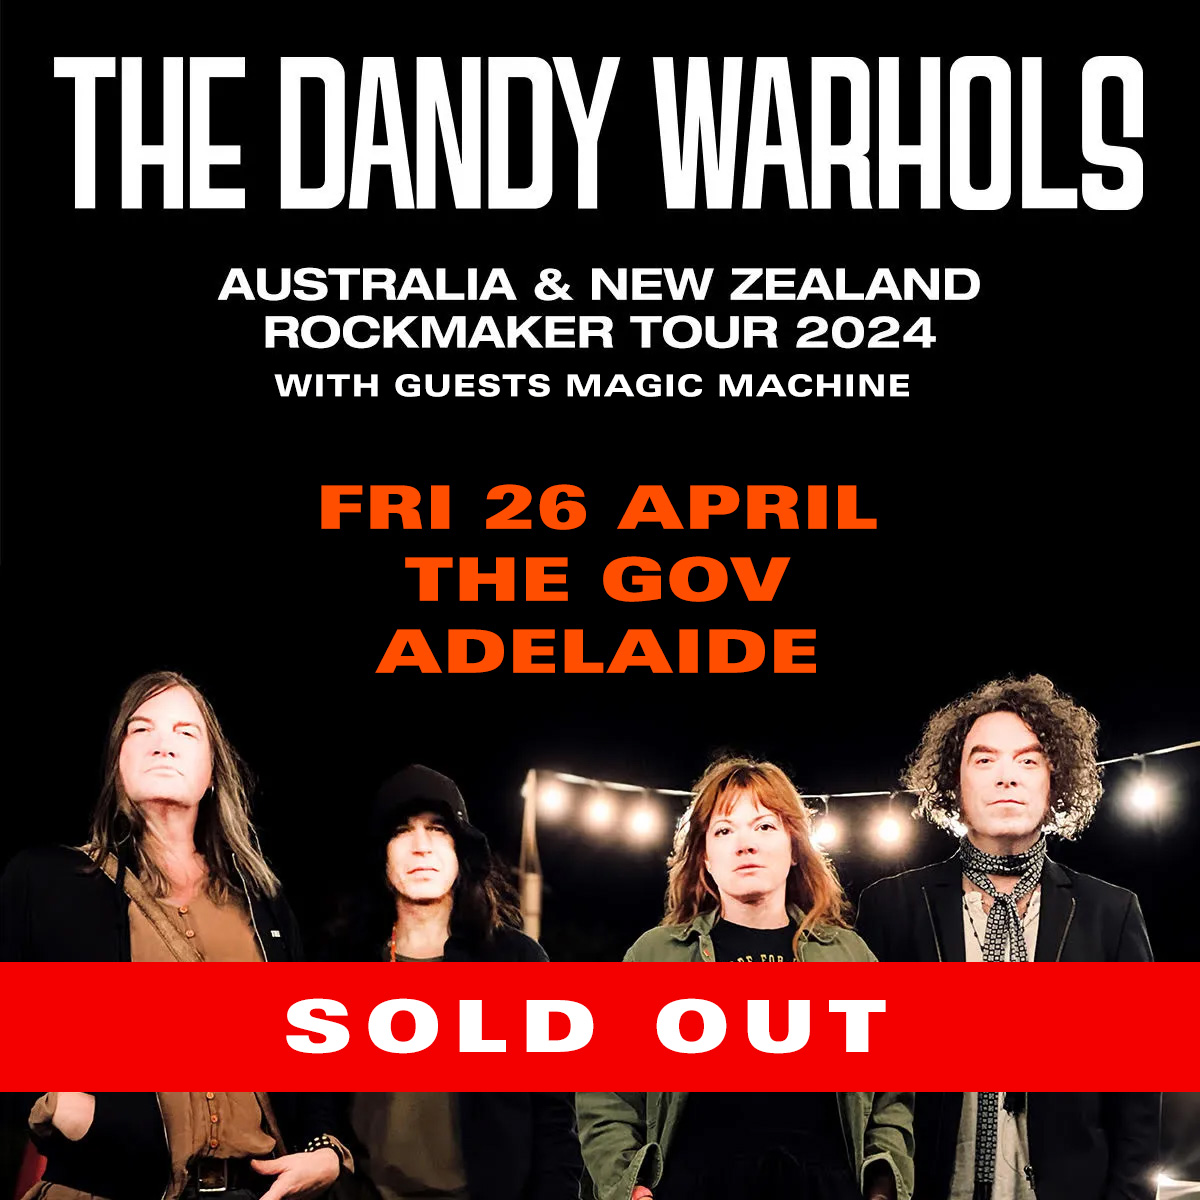 🇦🇺TOMORROW 26/4 - Show #1 in Adelaide at @TheGovHindmarsh - SOLD OUT